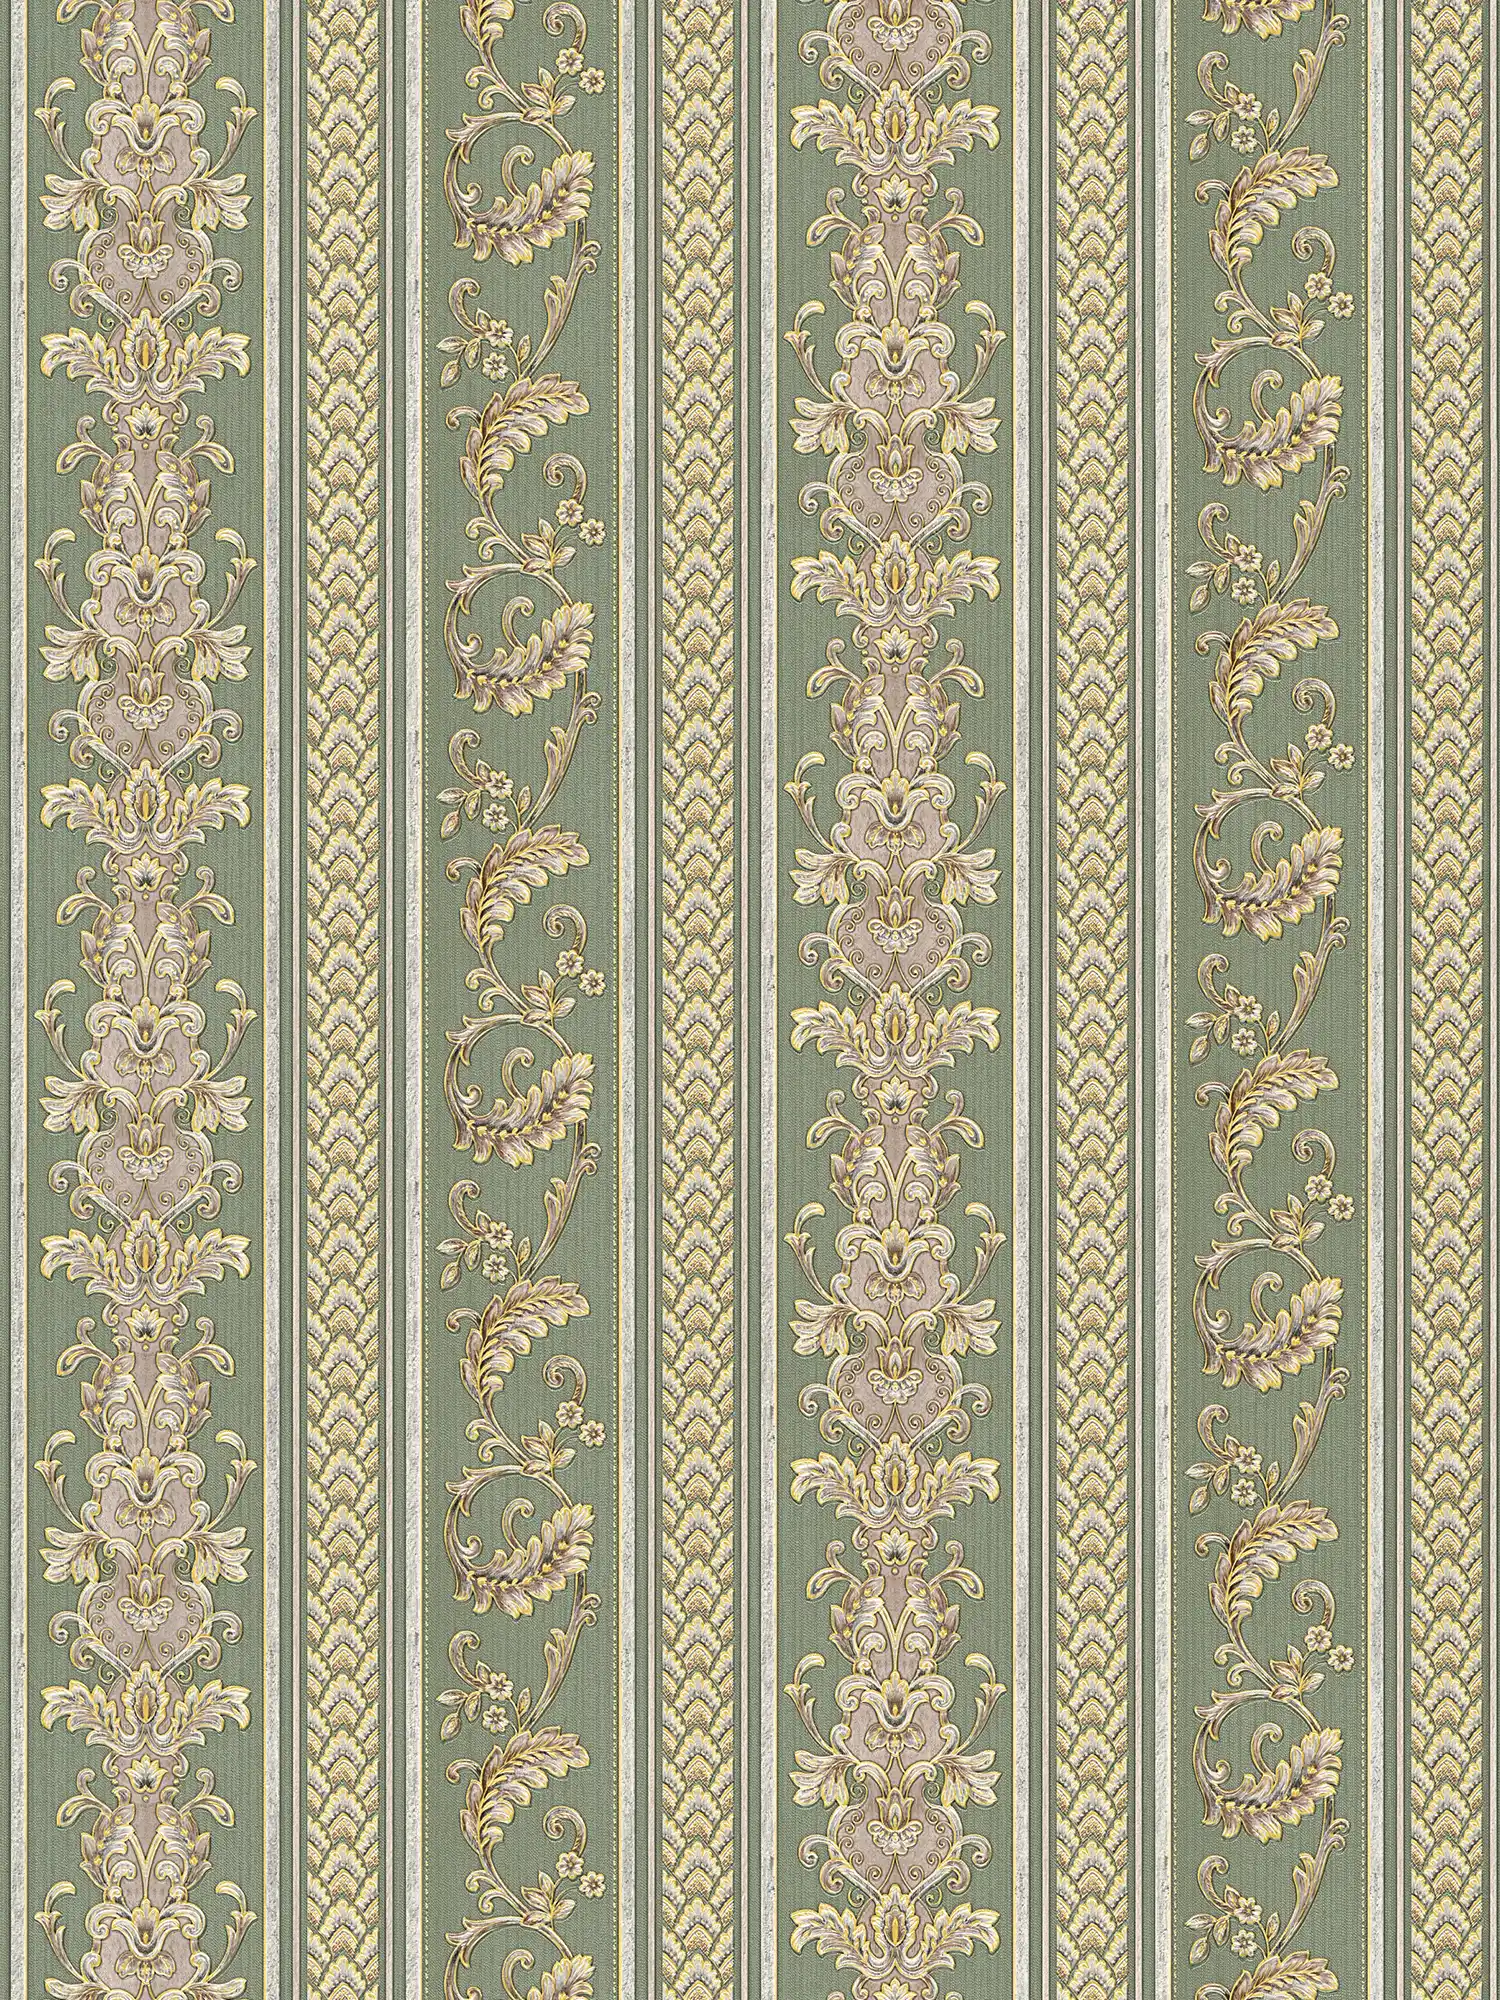 Wallpaper striped with baroque ornaments - gold, green
